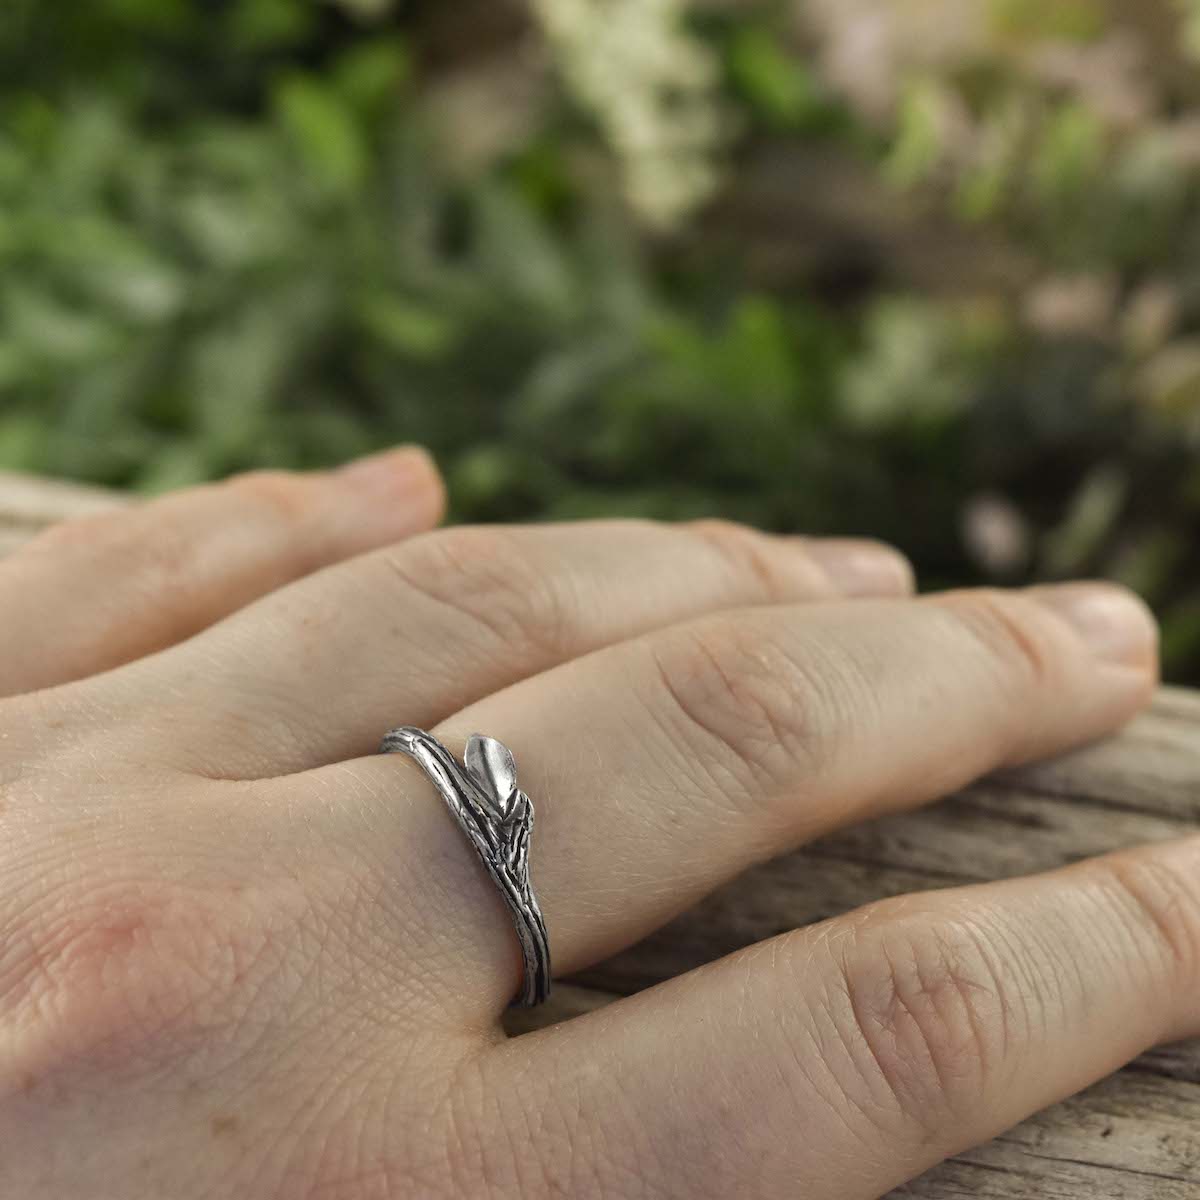 Silver Summer Twig Ring - Wedding Ring  Select Size  4 2673 - handmade by Beth Millner Jewelry